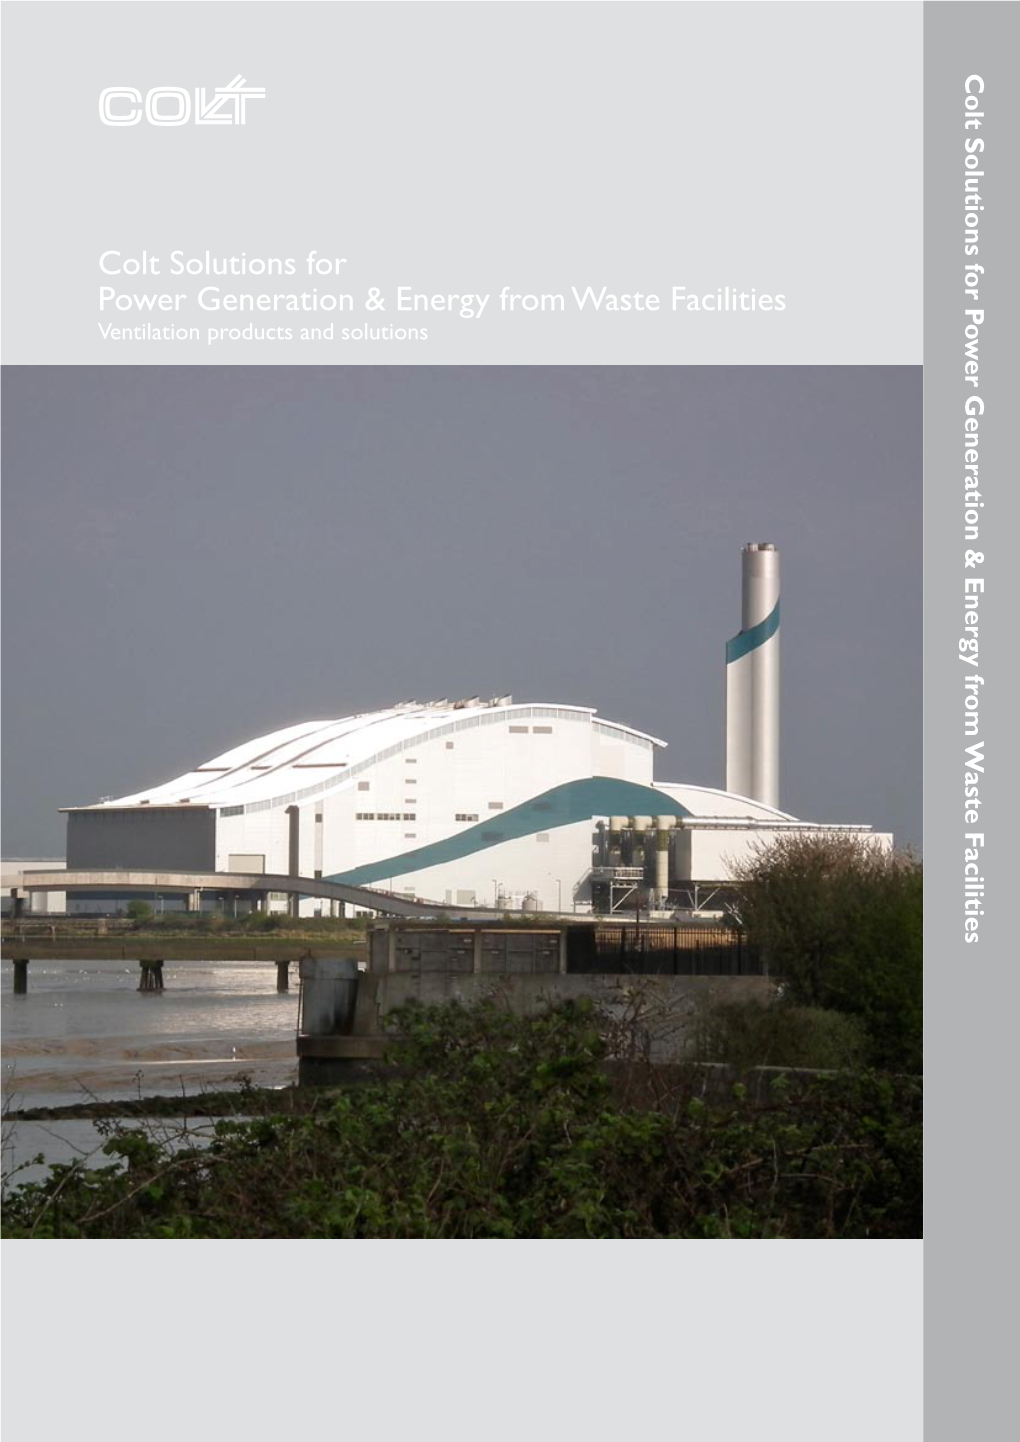 Colt Solutions for Power Generation & Energy from Waste Facilities